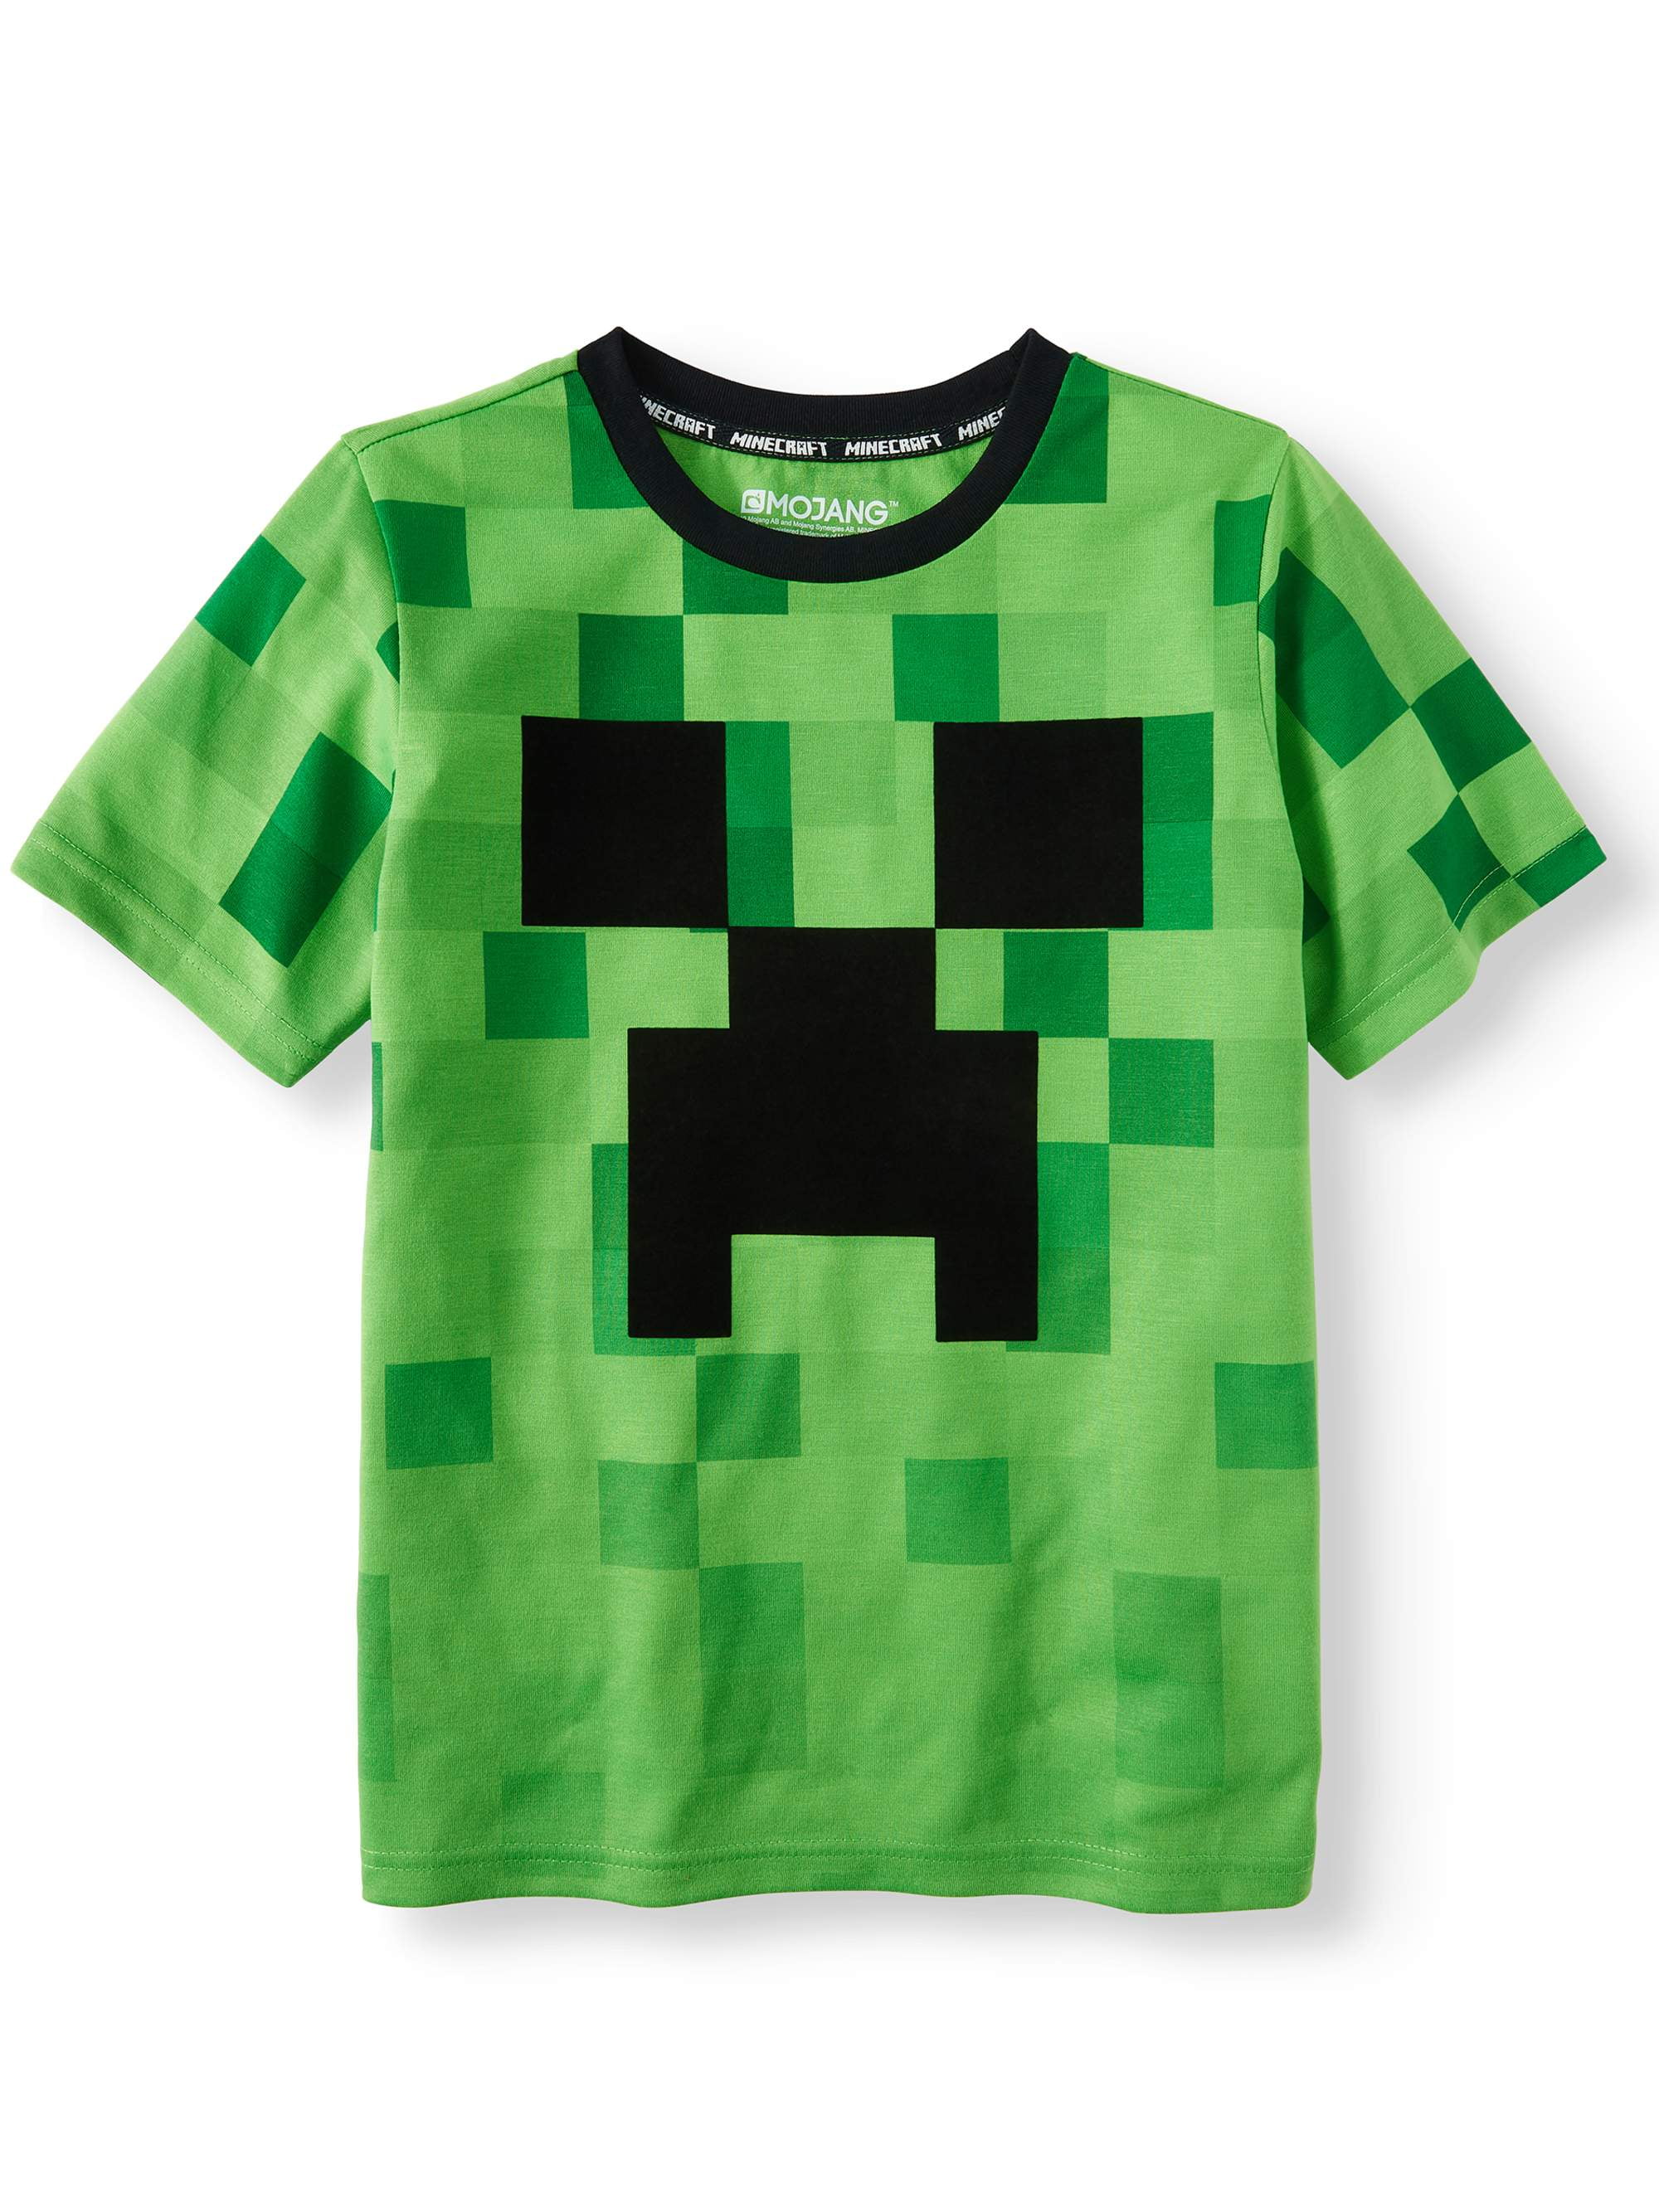 Minecraft Creeper Lineup Licensed Youth T-Shirt Tee XS S M L XL 